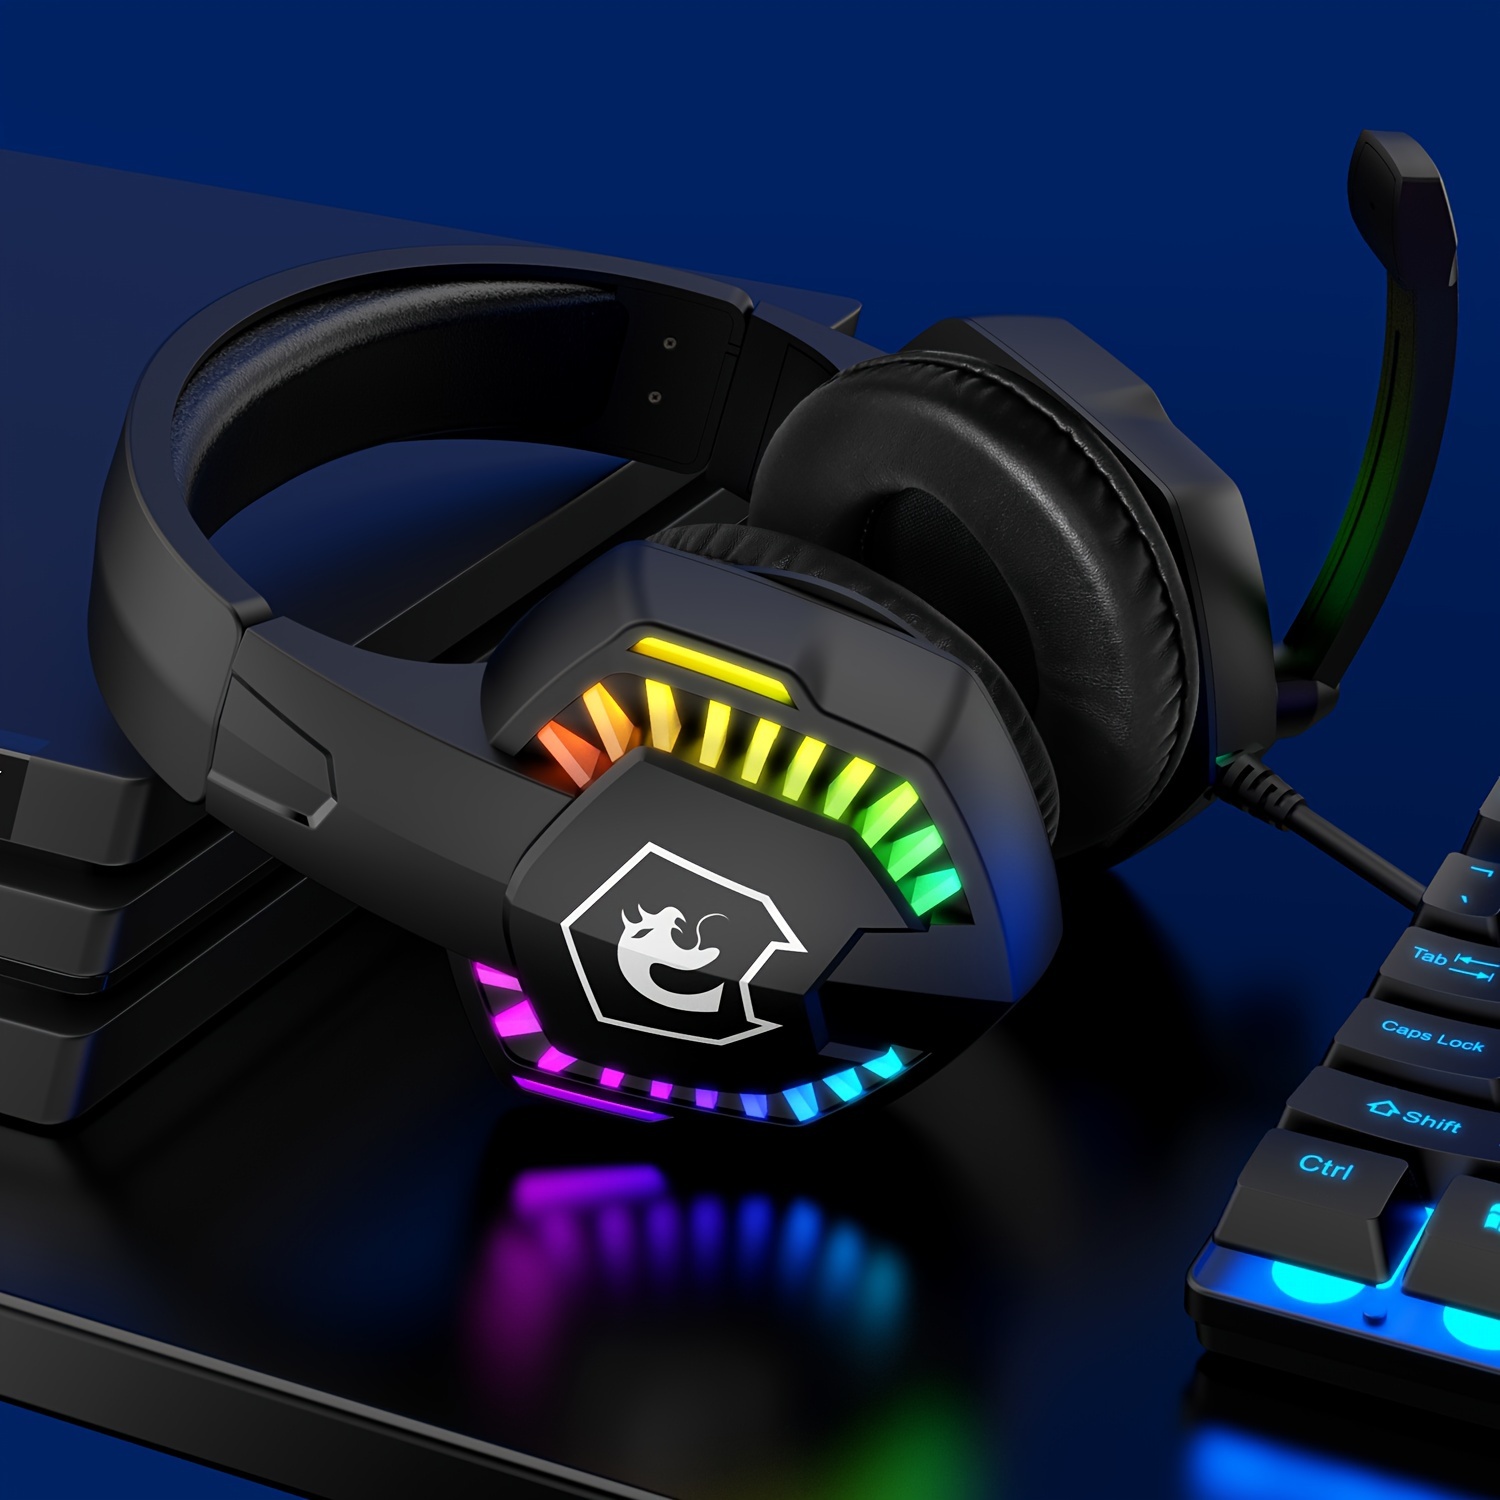 Auriculares Stereo PC / PS4 / PS5 / Xbox Gaming Led RGB COOL